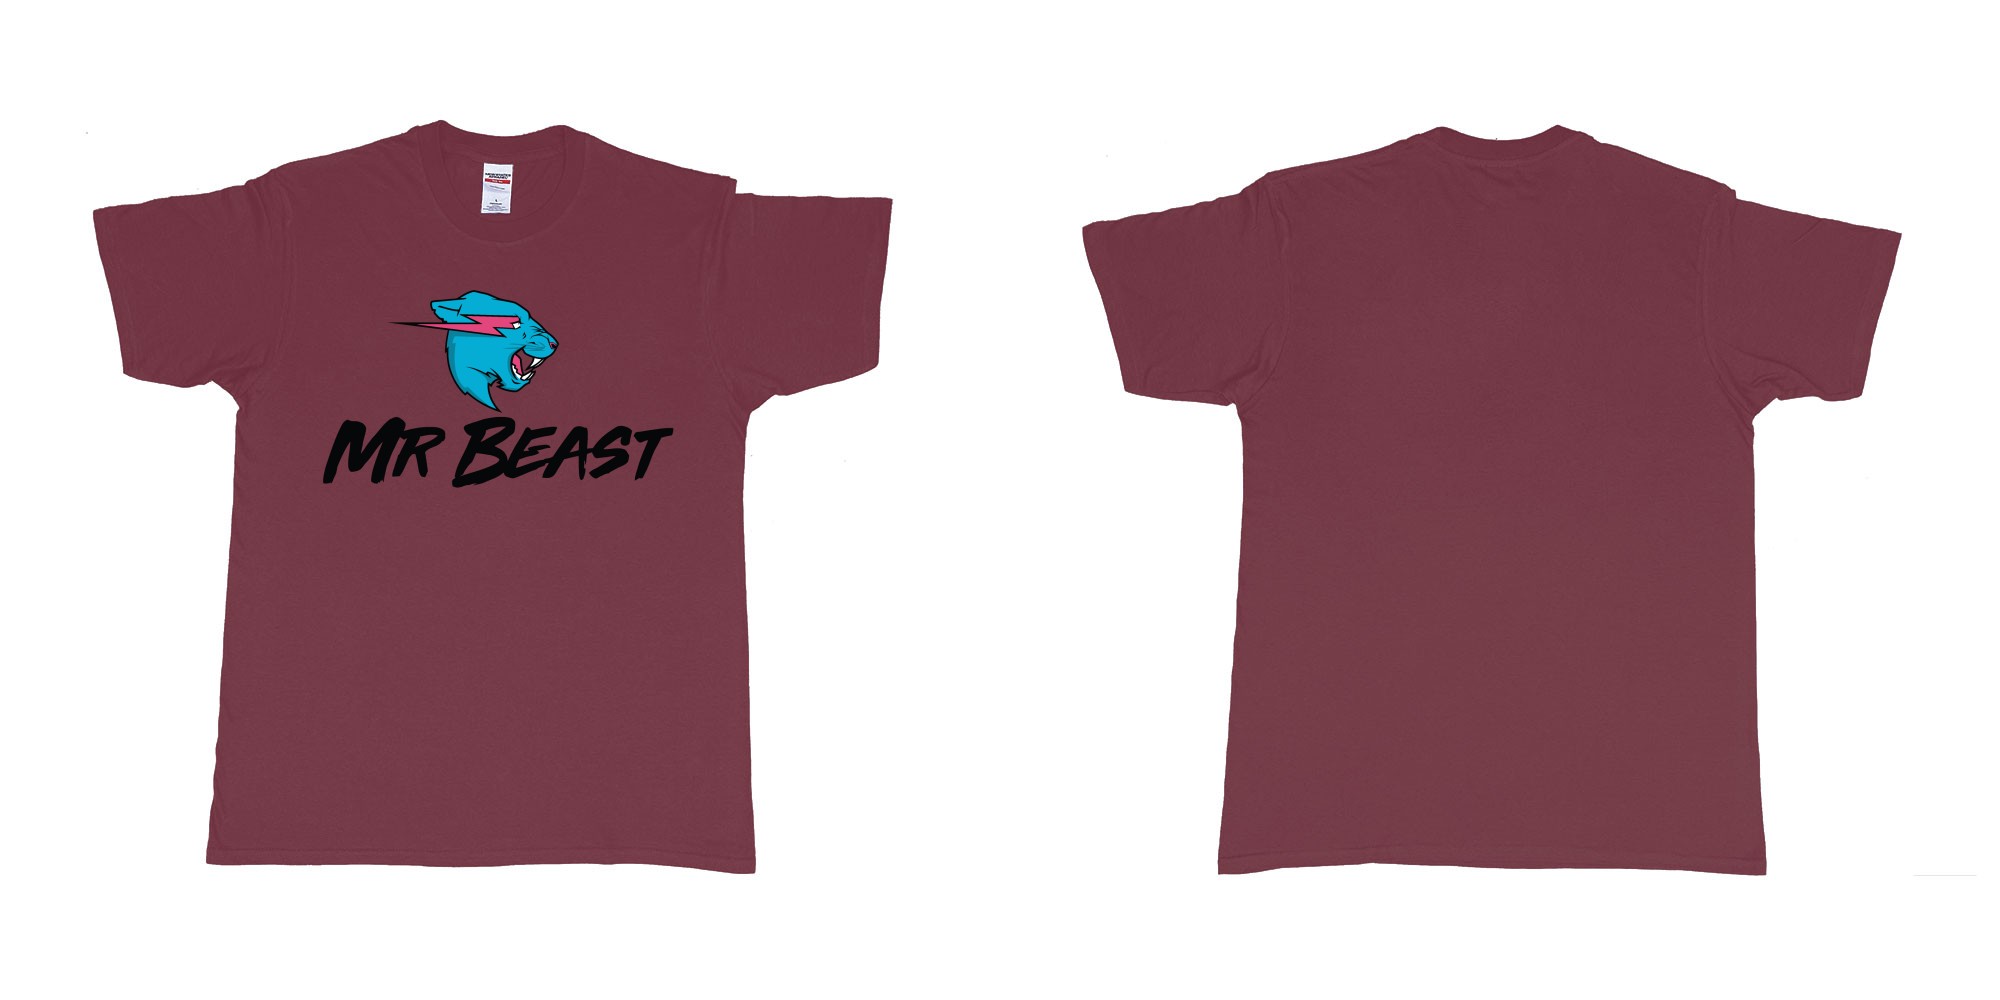 Custom tshirt design mr beast logo in fabric color marron choice your own text made in Bali by The Pirate Way